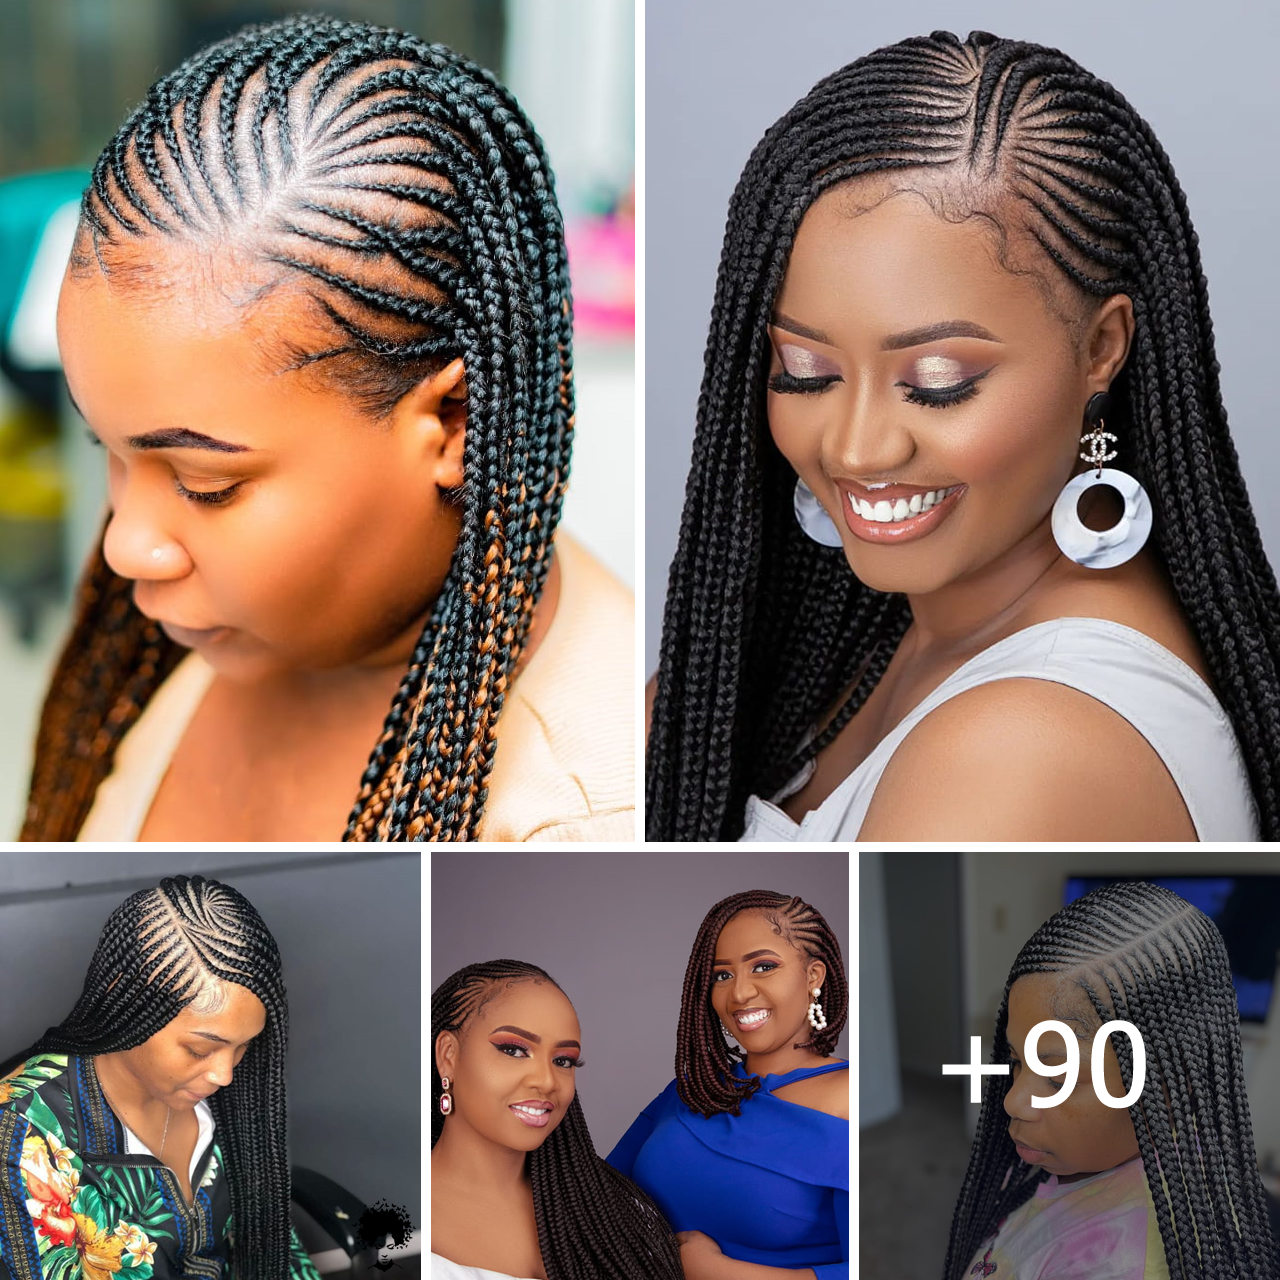 The Ultimate Guide to Braided Hairstyles for Women